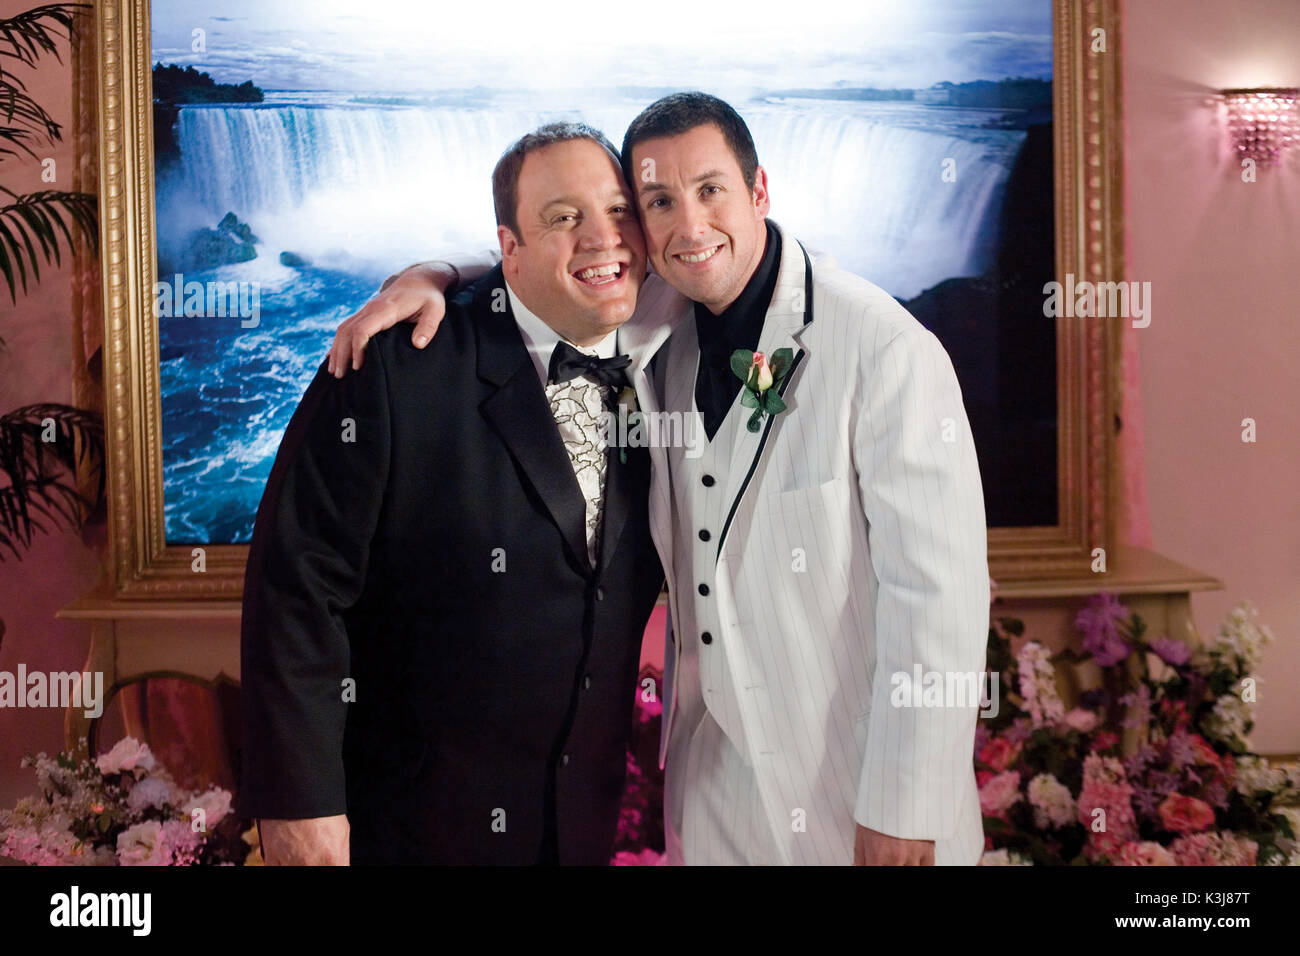 (L-R) KEVIN JAMES and ADAM SANDLER star in the comedy I Now Pronounce You Chuck and Larry. I NOW PRONOUNCE YOU CHUCK & LARRY KEVIN JAMES, ADAM SANDLER Stock Photo